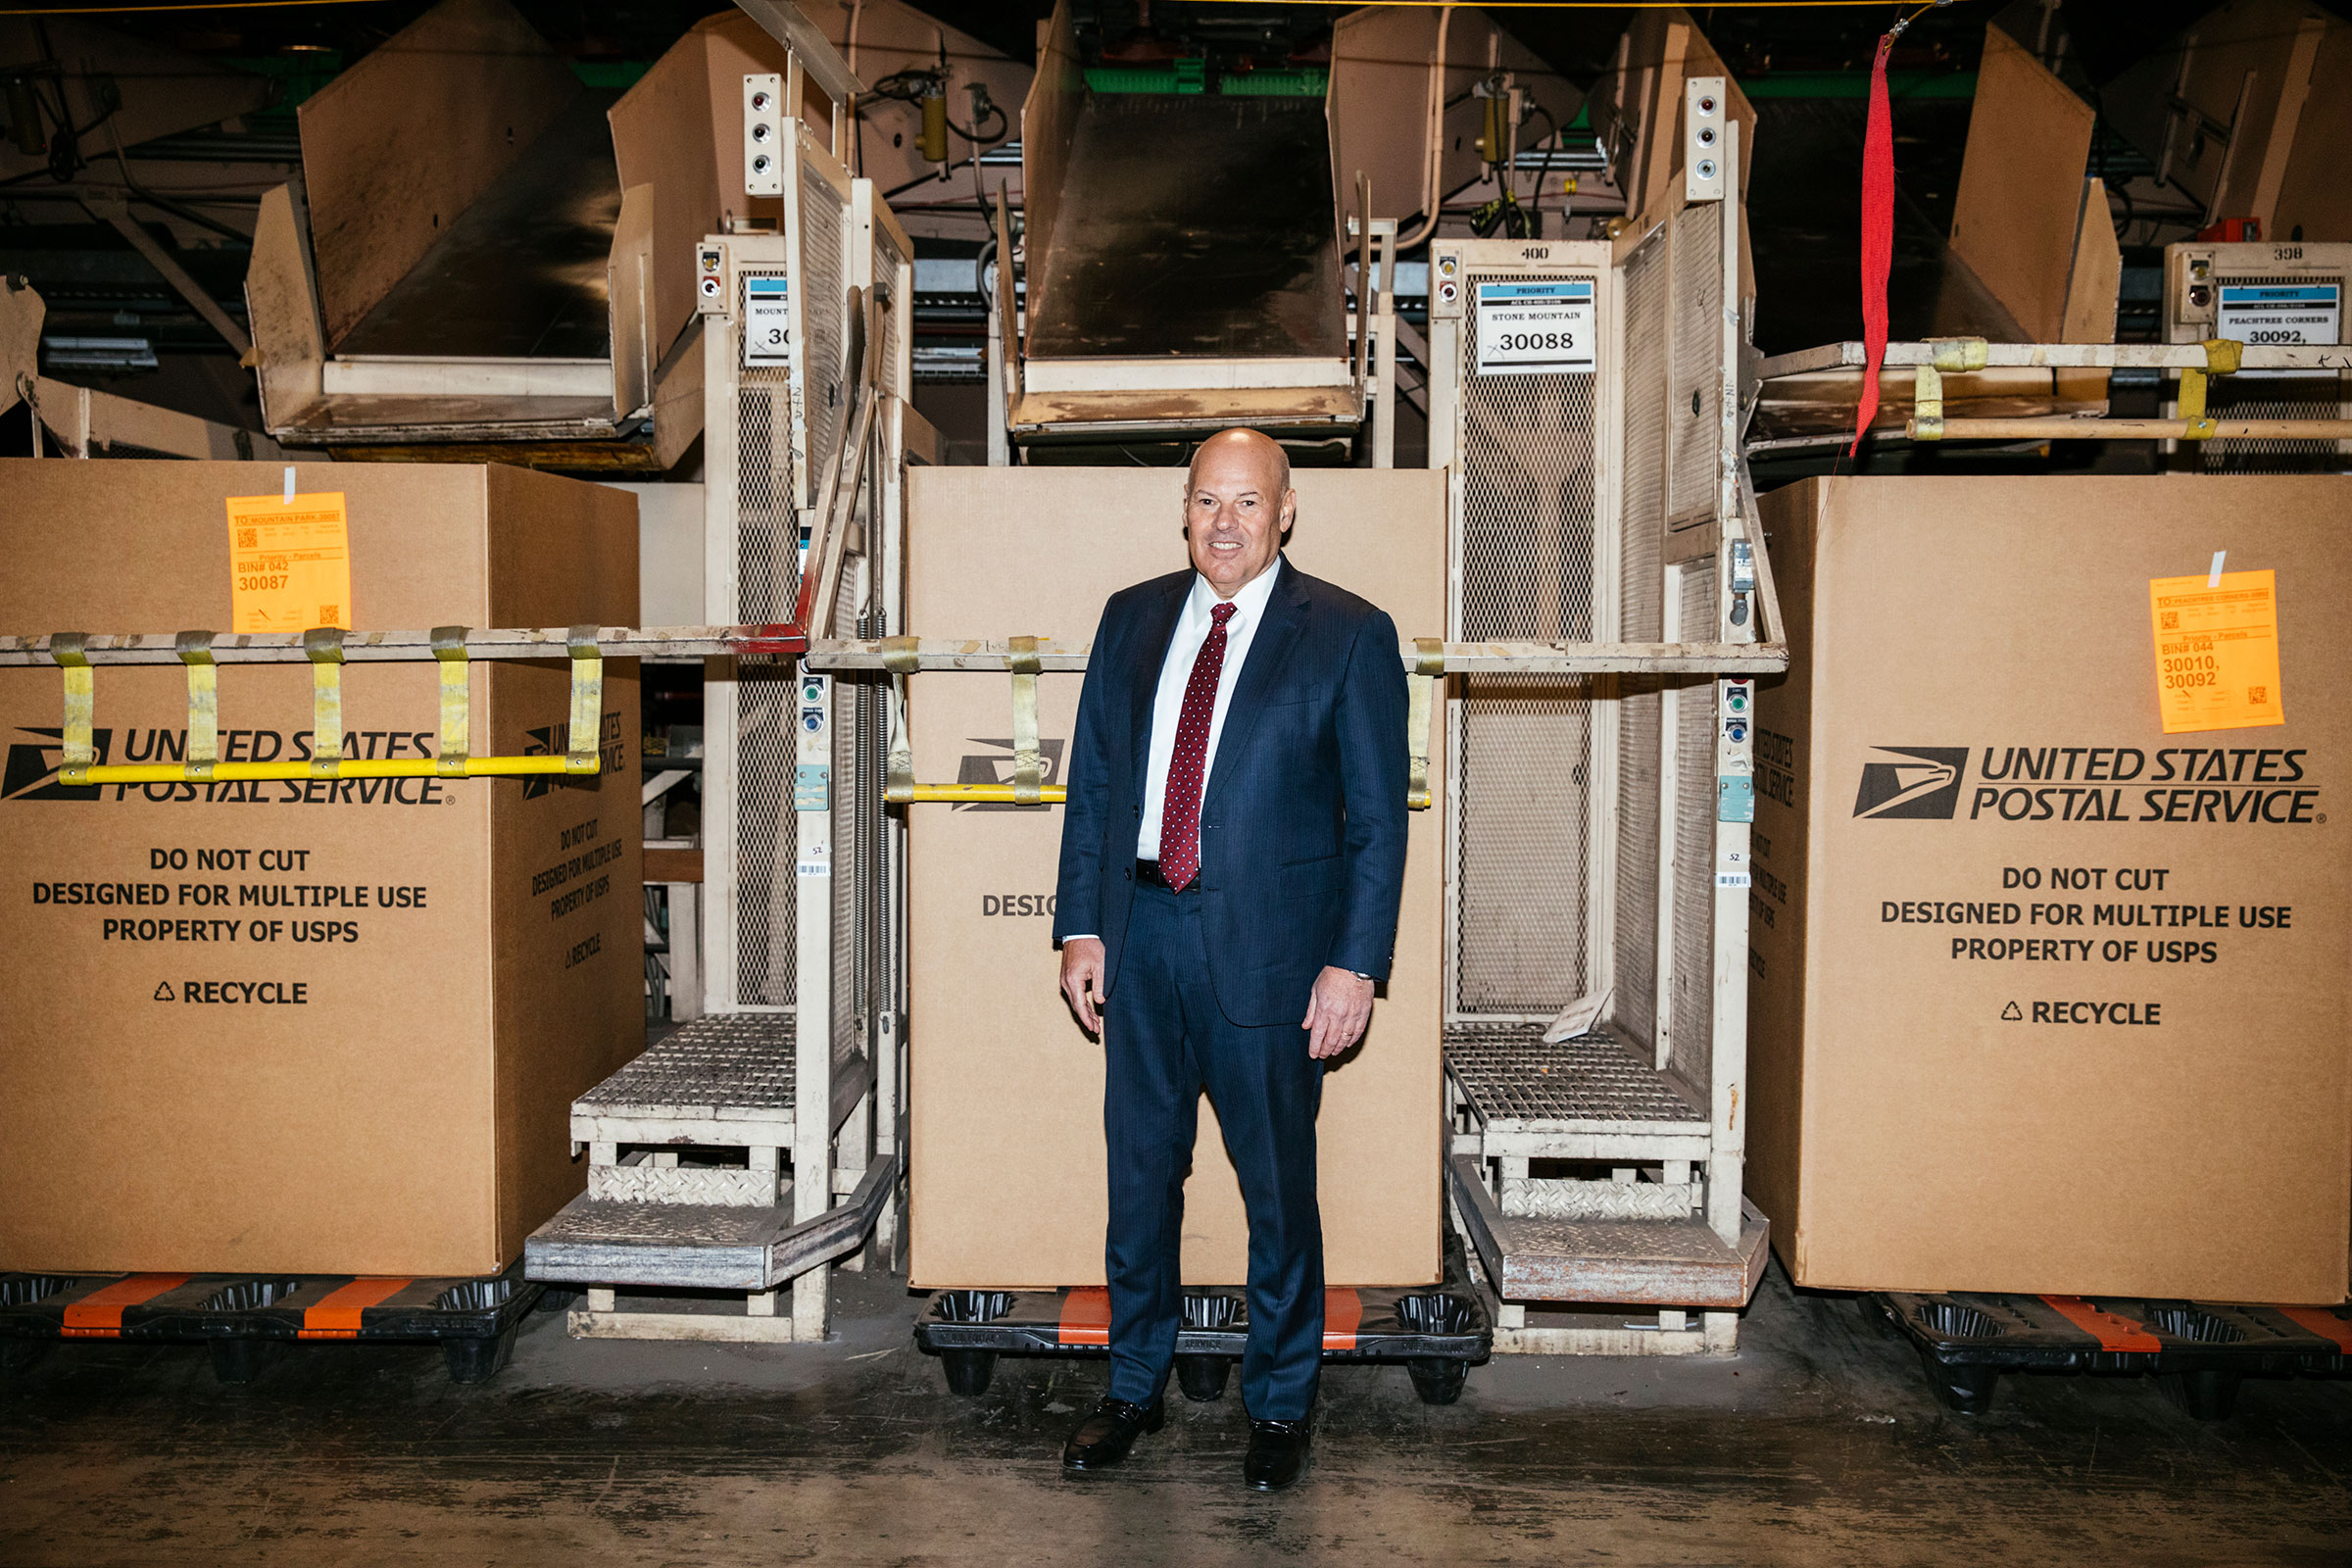 United States Postmaster General Louis DeJoy plans to modernize the outdated postal system. He poses for a portrait in front of a parcel sorting machine at the USPS Atlanta Network Distribution Center in Atlanta, Georgia February 3, 2023. Photo by Kendrick Brinson